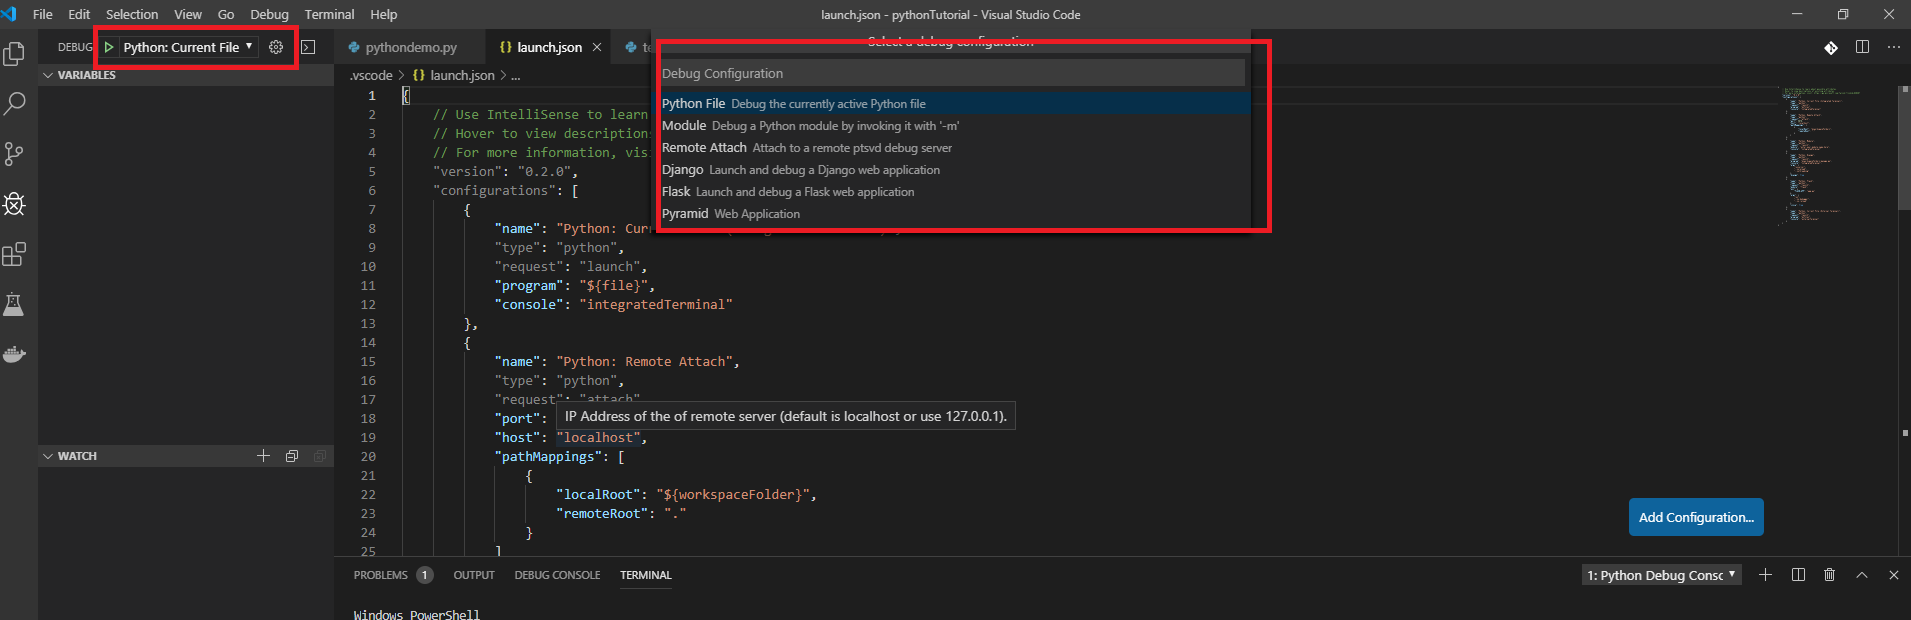 Configuring the debugger in VS Code